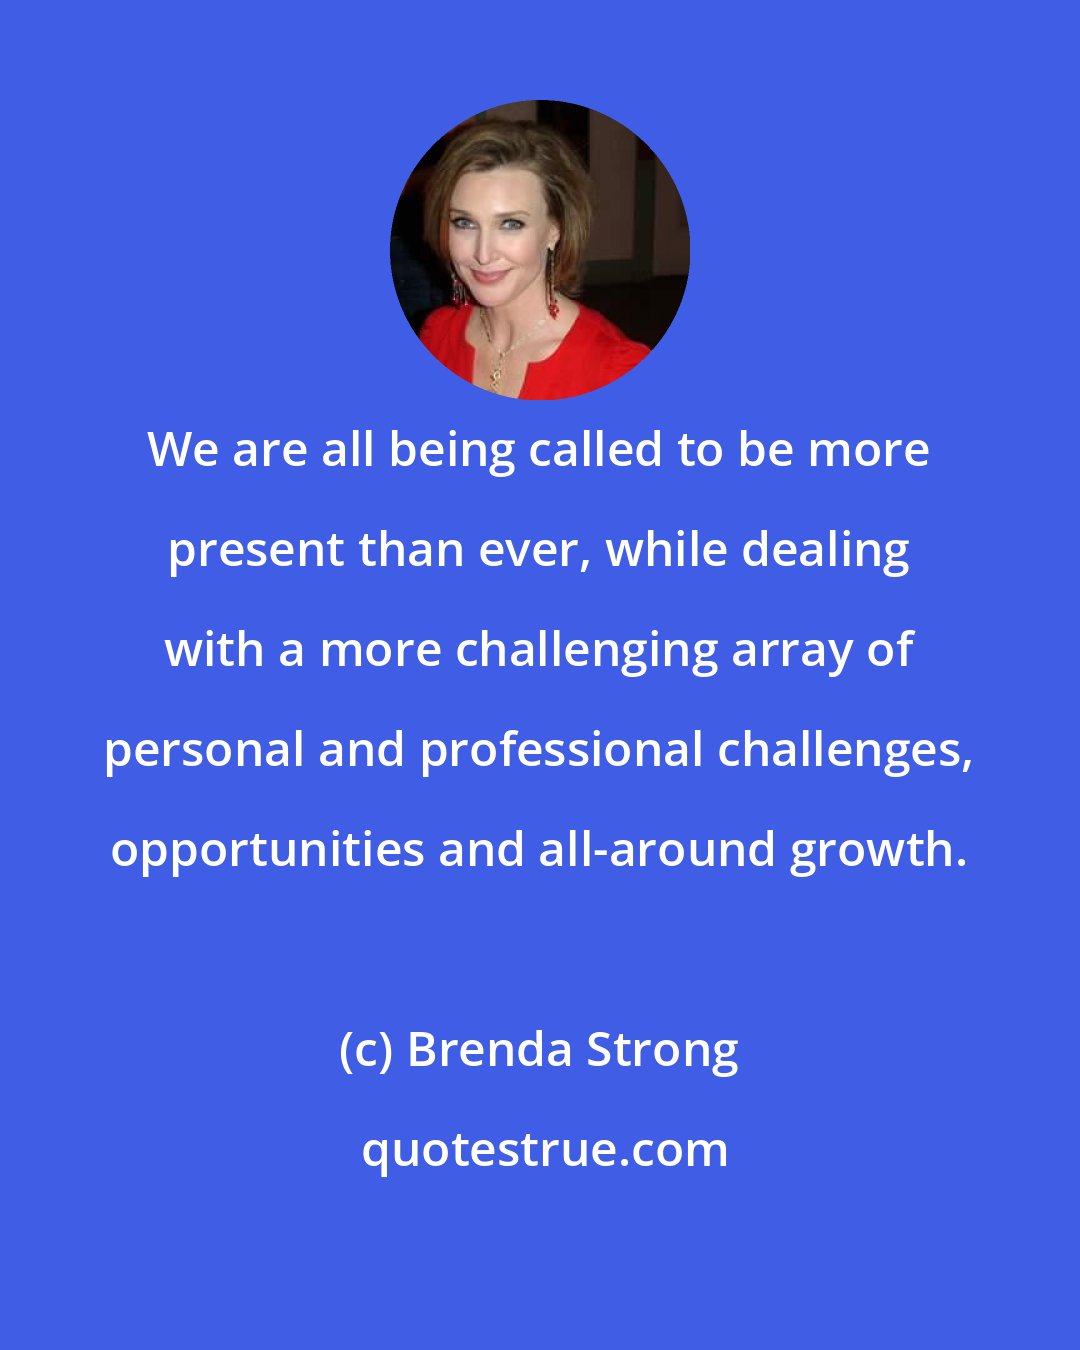 Brenda Strong: We are all being called to be more present than ever, while dealing with a more challenging array of personal and professional challenges, opportunities and all-around growth.